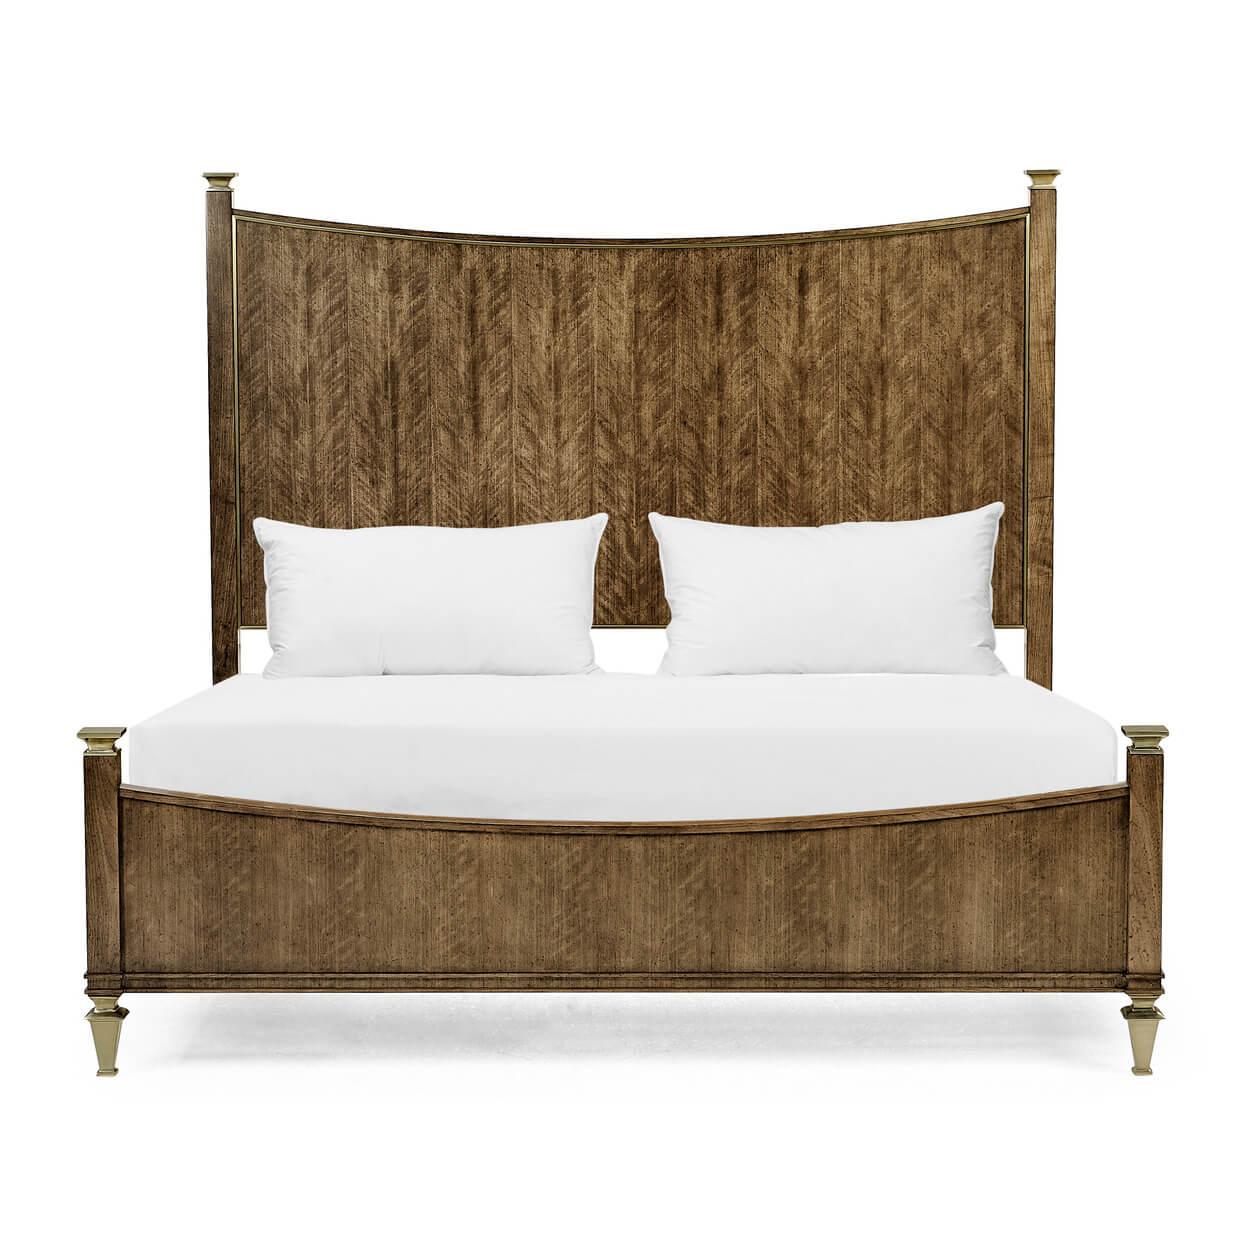 A European classic figured quartered walnut king-size bed, with a sloped headboard and foot board and a with molded edges and square tapered feet.

Dimensions: 82